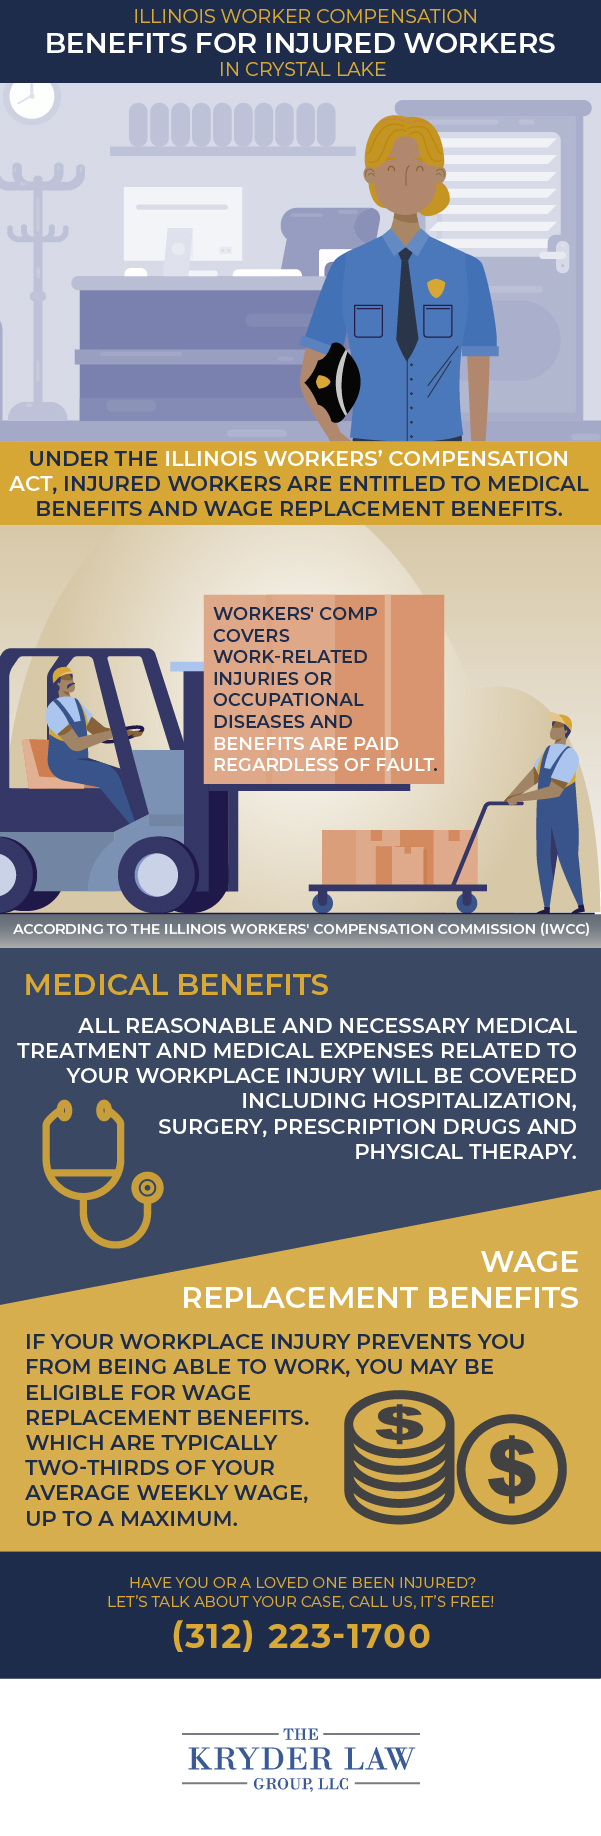 The Benefits of Hiring a Crystal Lake Workers' Compensation Lawyer Infographic